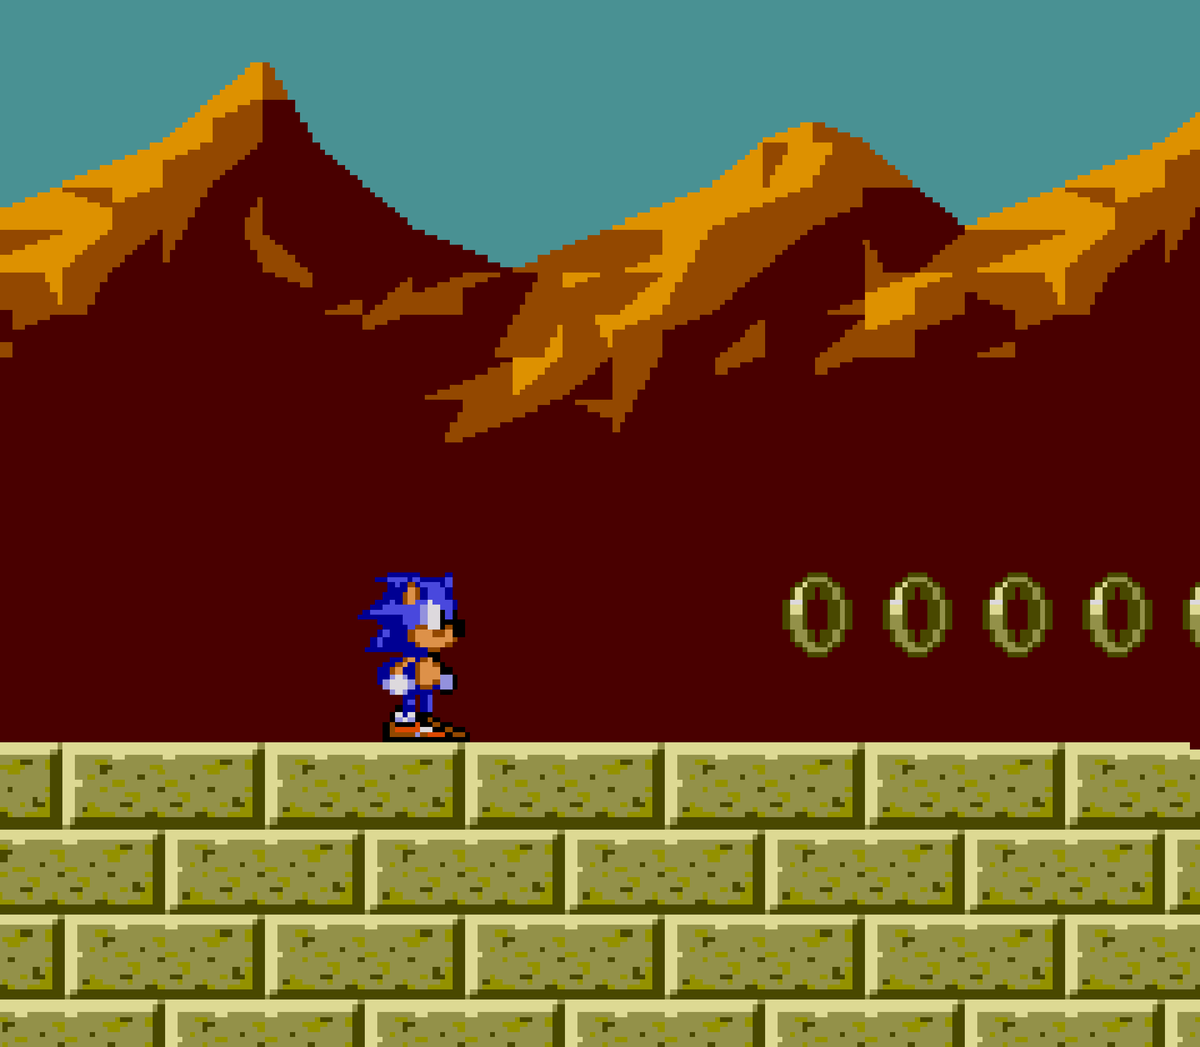 download Sonic the Hedgehog (8 бит)